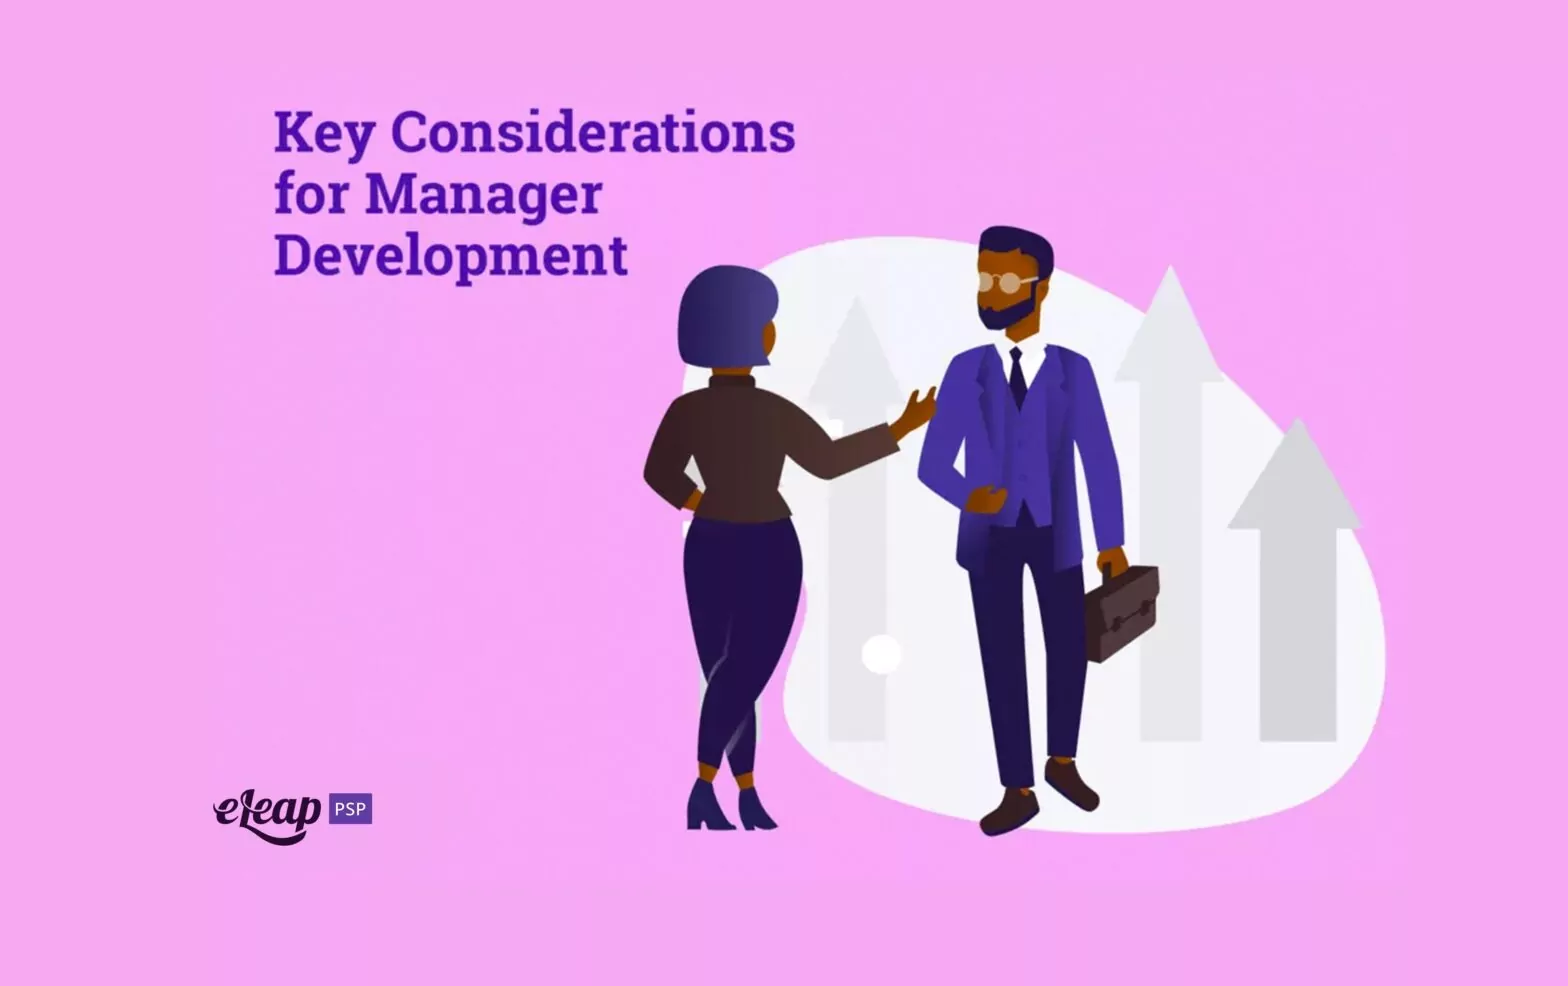 Key Considerations for Manager Development